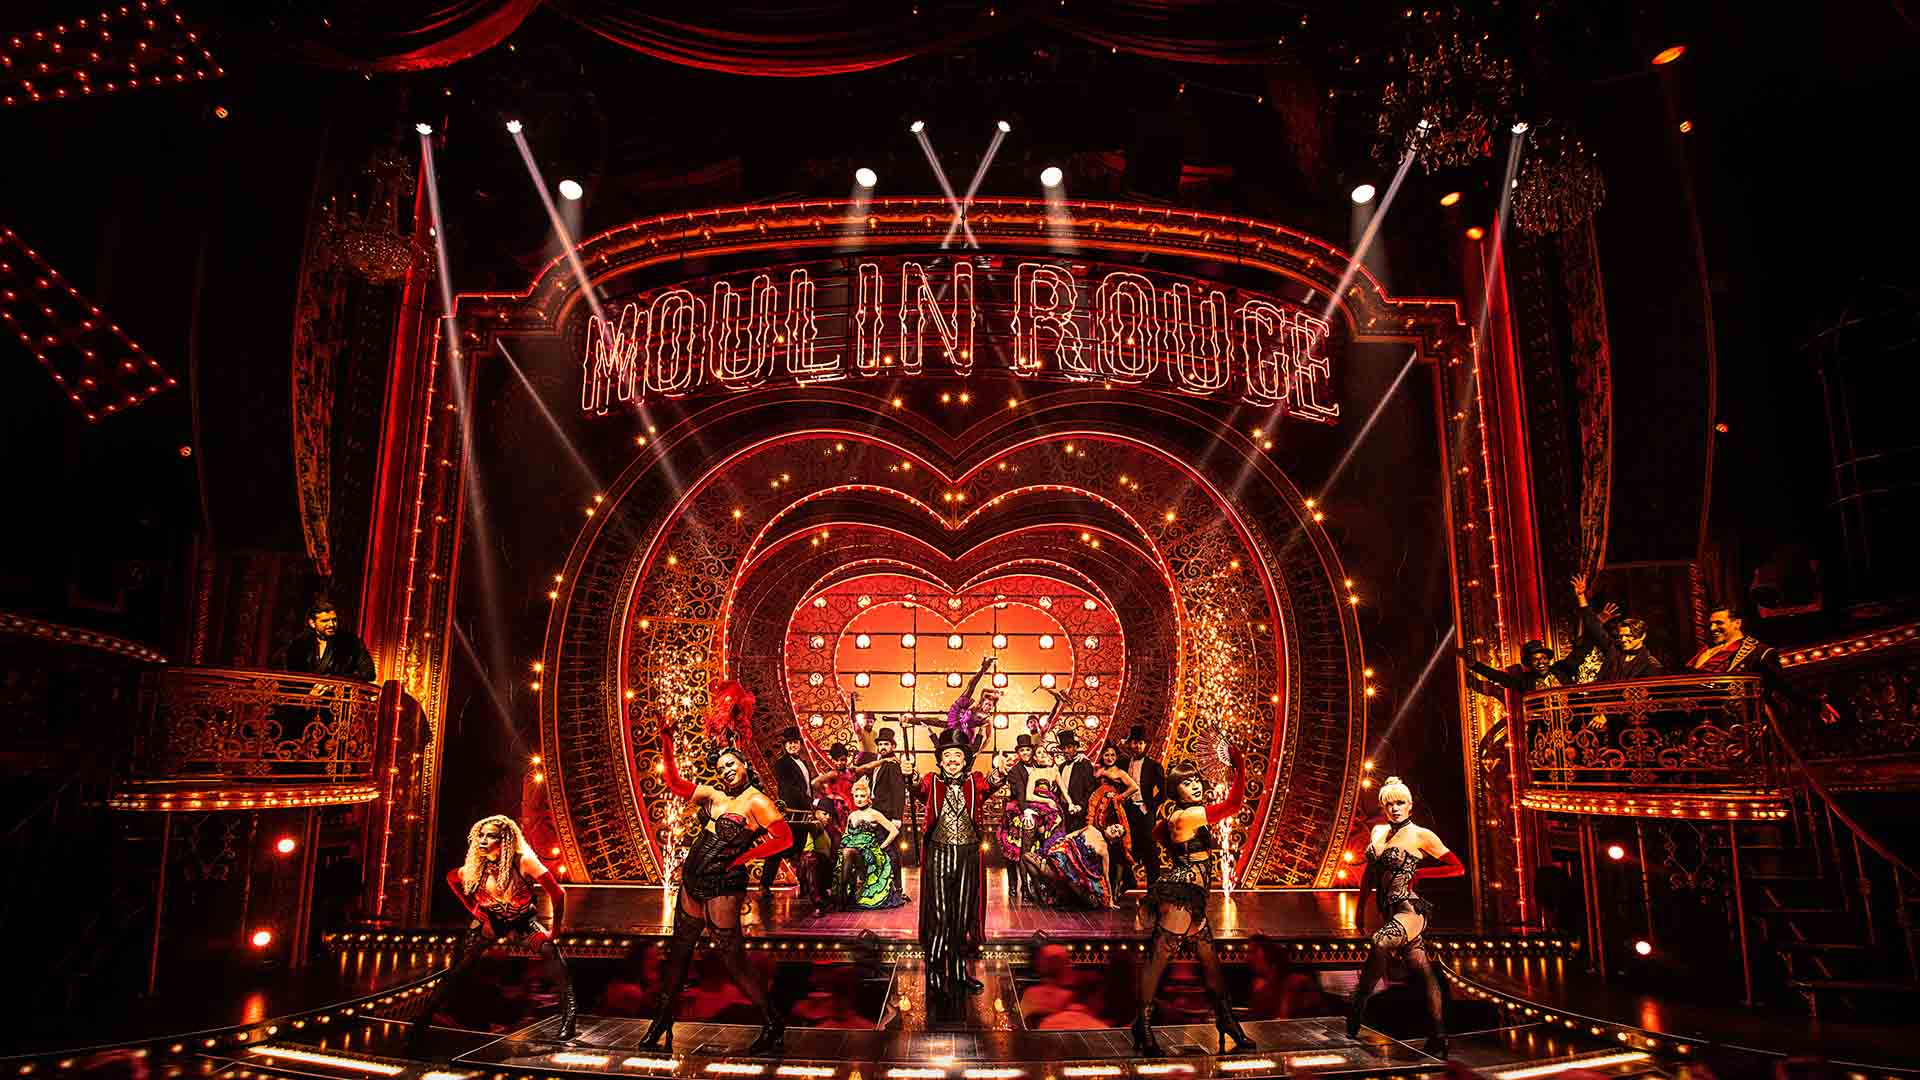 'Moulin Rouge! The Musical' Is Still Aiming to Sing and Dance Its Way Down Under in 2021